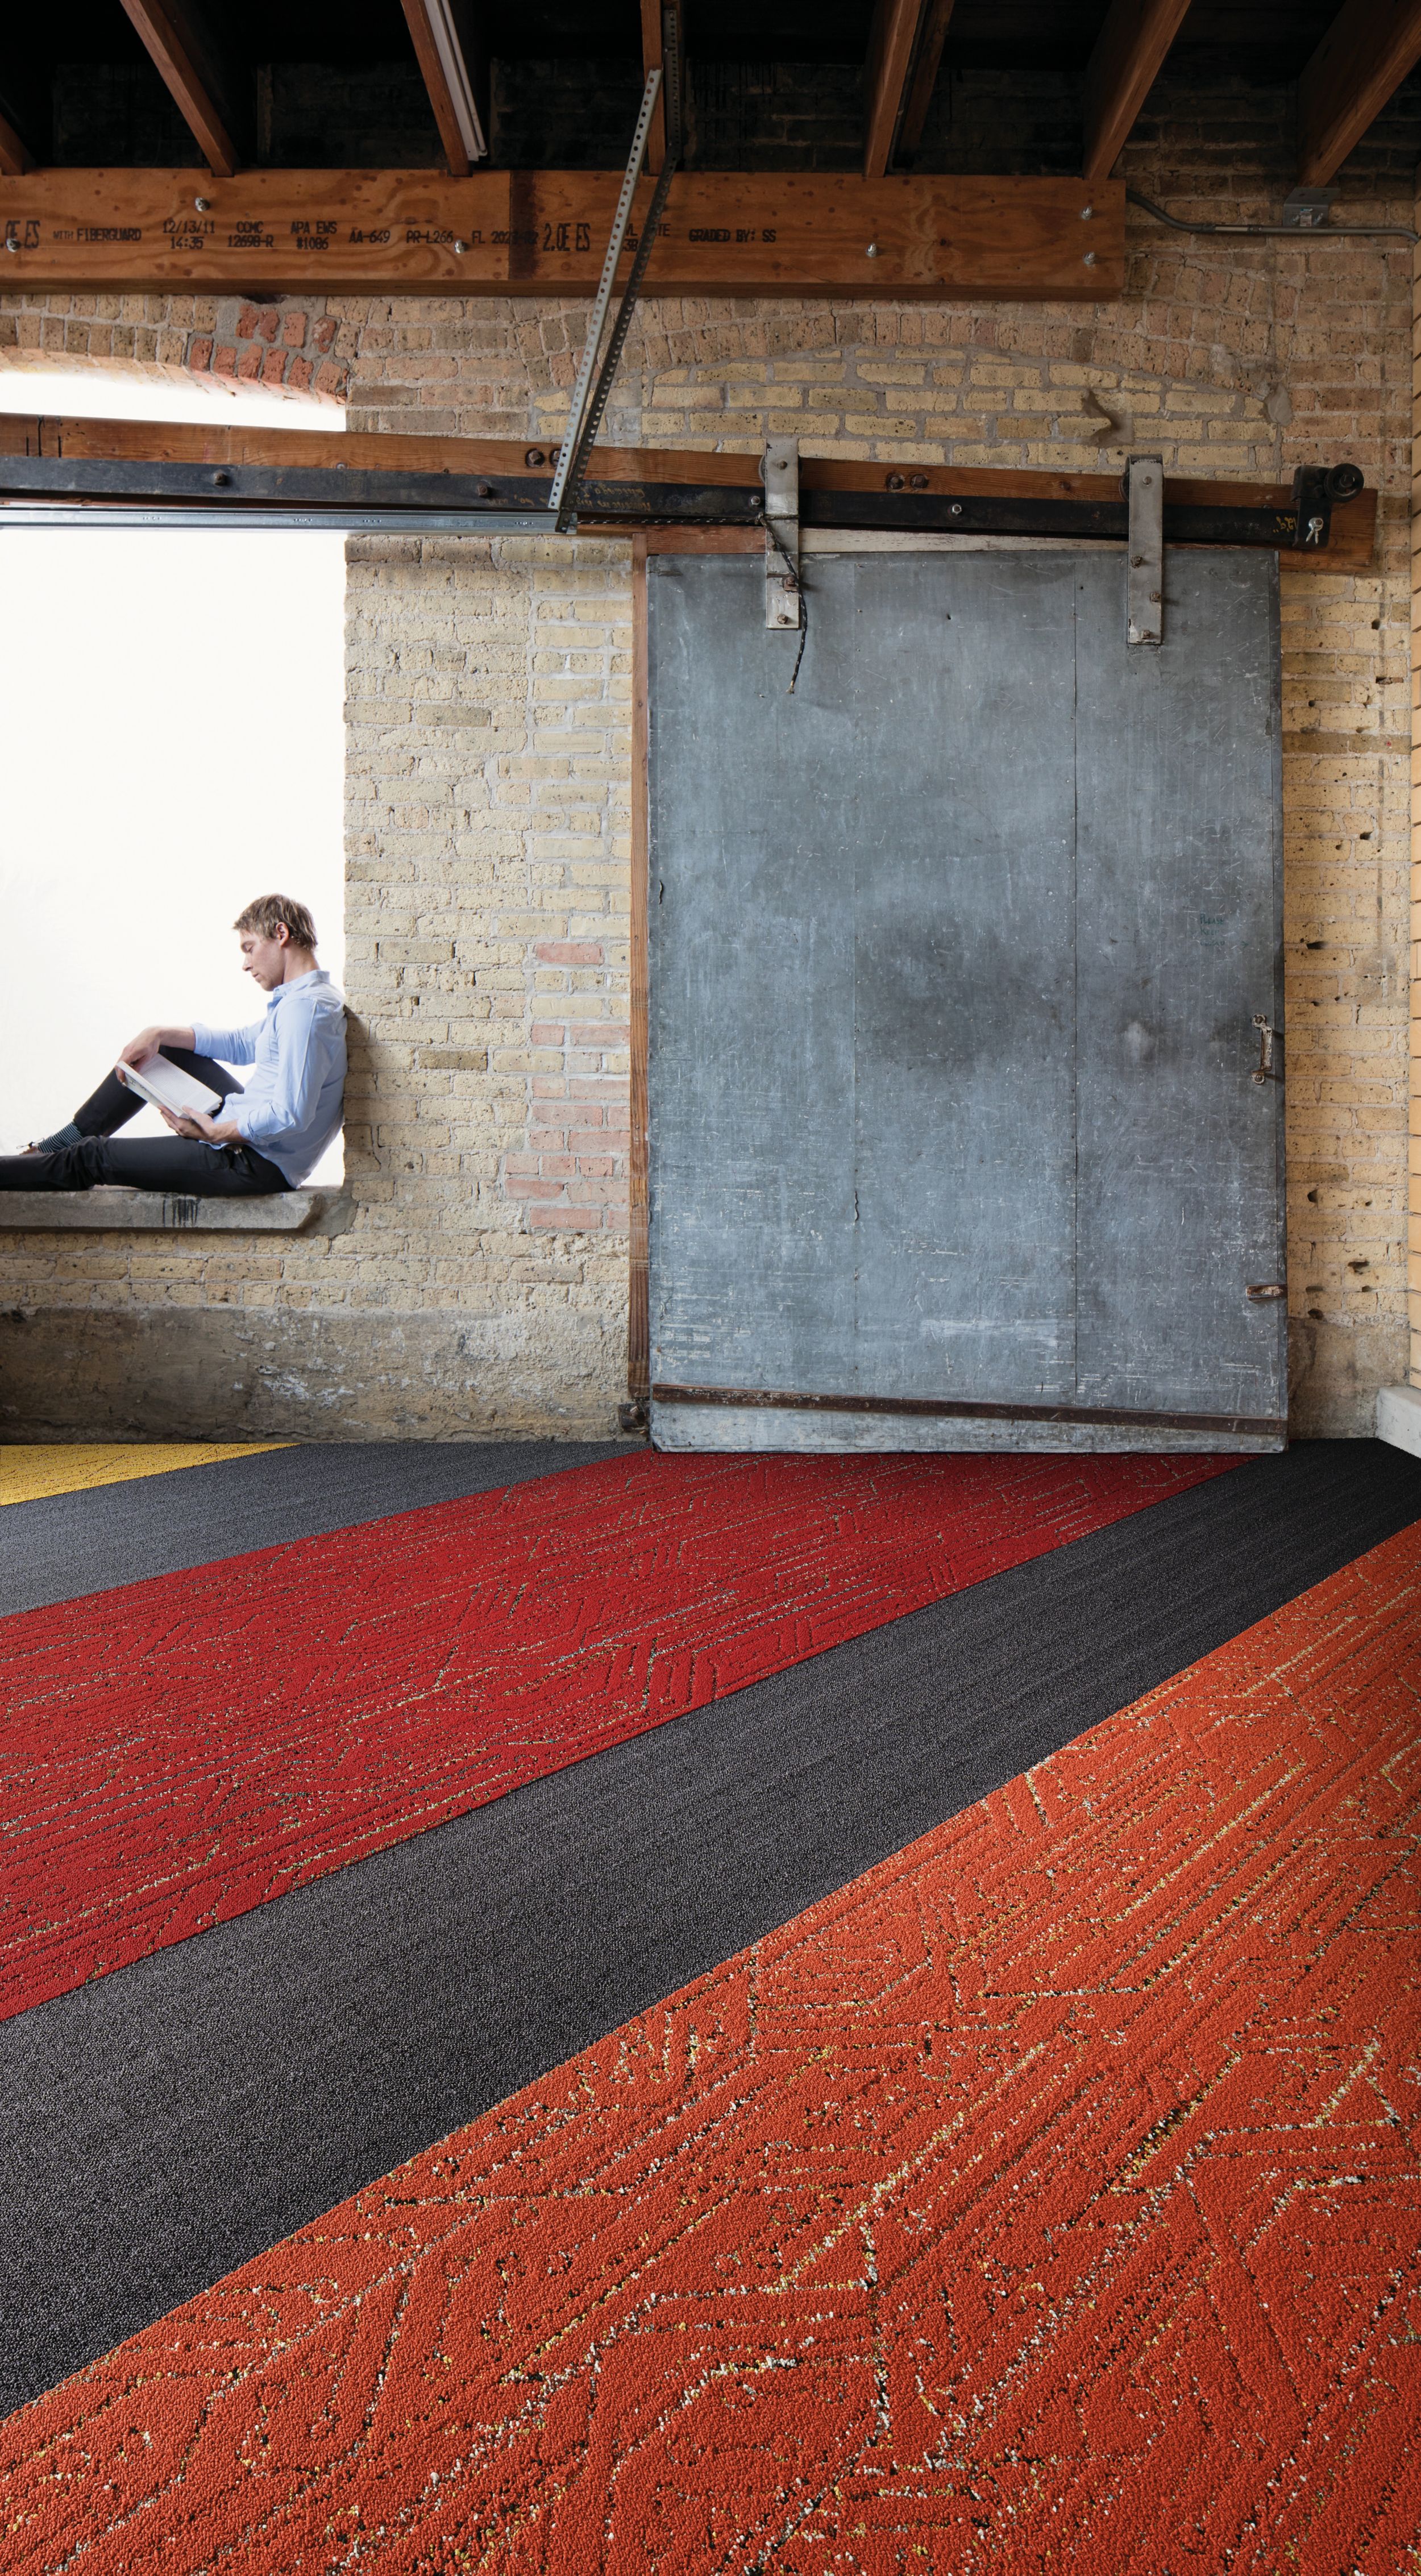 Interface Circuit Board and Plain Stitch plank carpet tile in modern office building with man seated image number 10